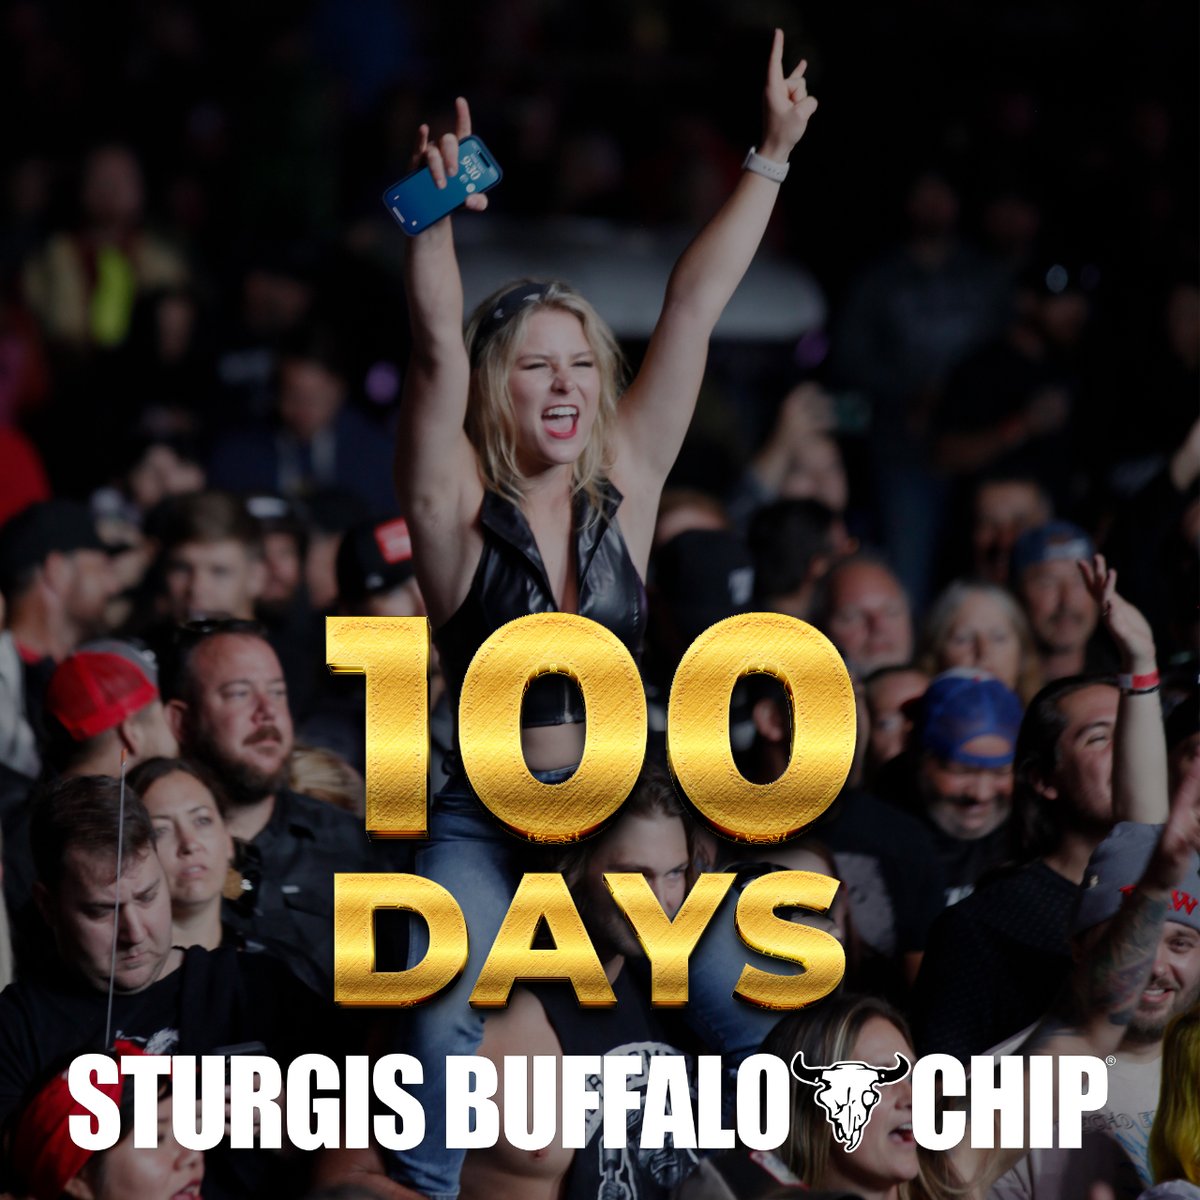 Countdown to the Best Party Anywhere: 100 Days! Are you ready to be part of something spectacular? Comment 'Rally2024' and we will DM you a link to grab your own passes for Rally 2024 at the Legendary Sturgis Buffalo Chip. #Progressive